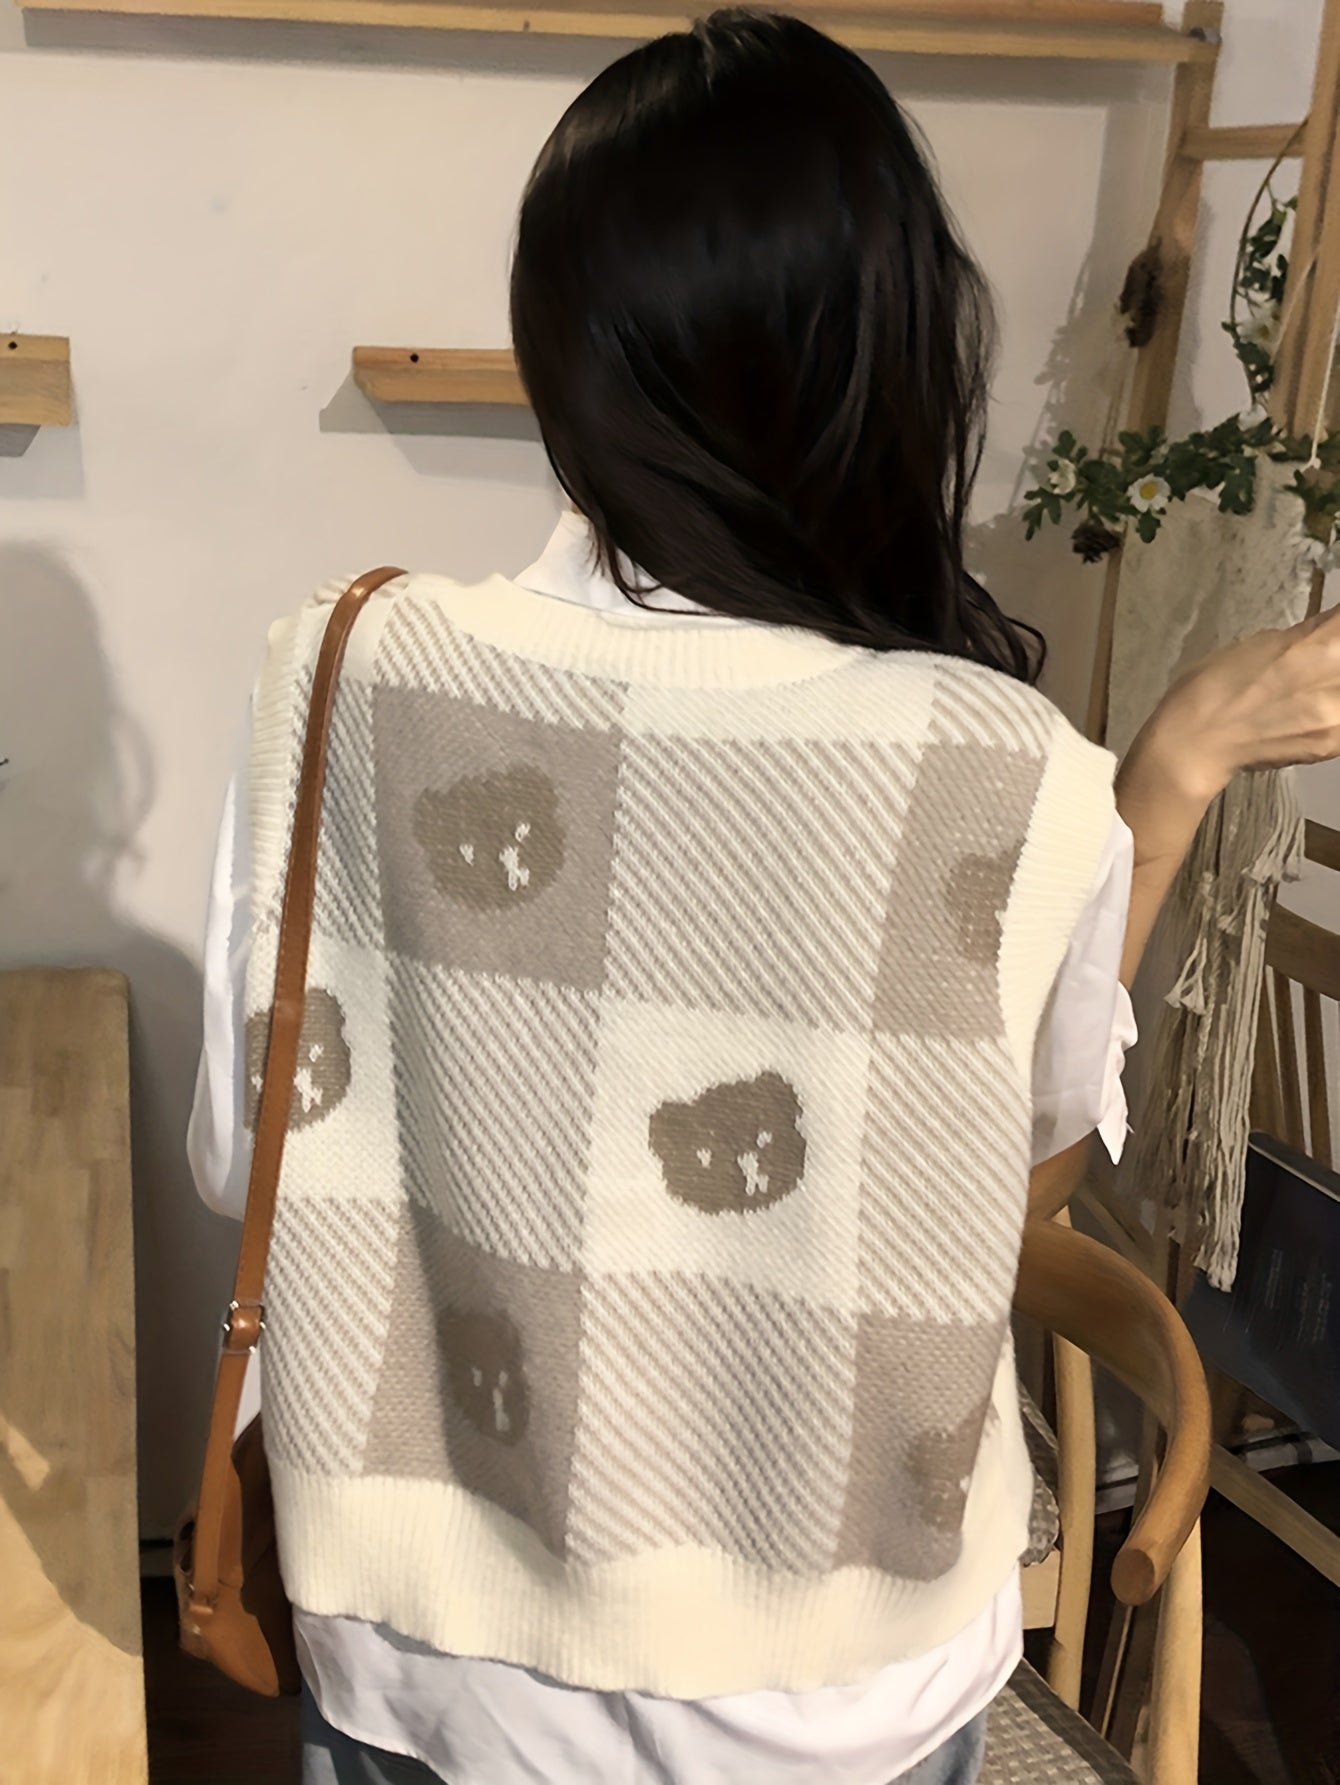 Antmvs Bear Pattern V Neck Knitted Vest, Casual Sleeveless Sweater For Spring & Fall, Women's Clothing